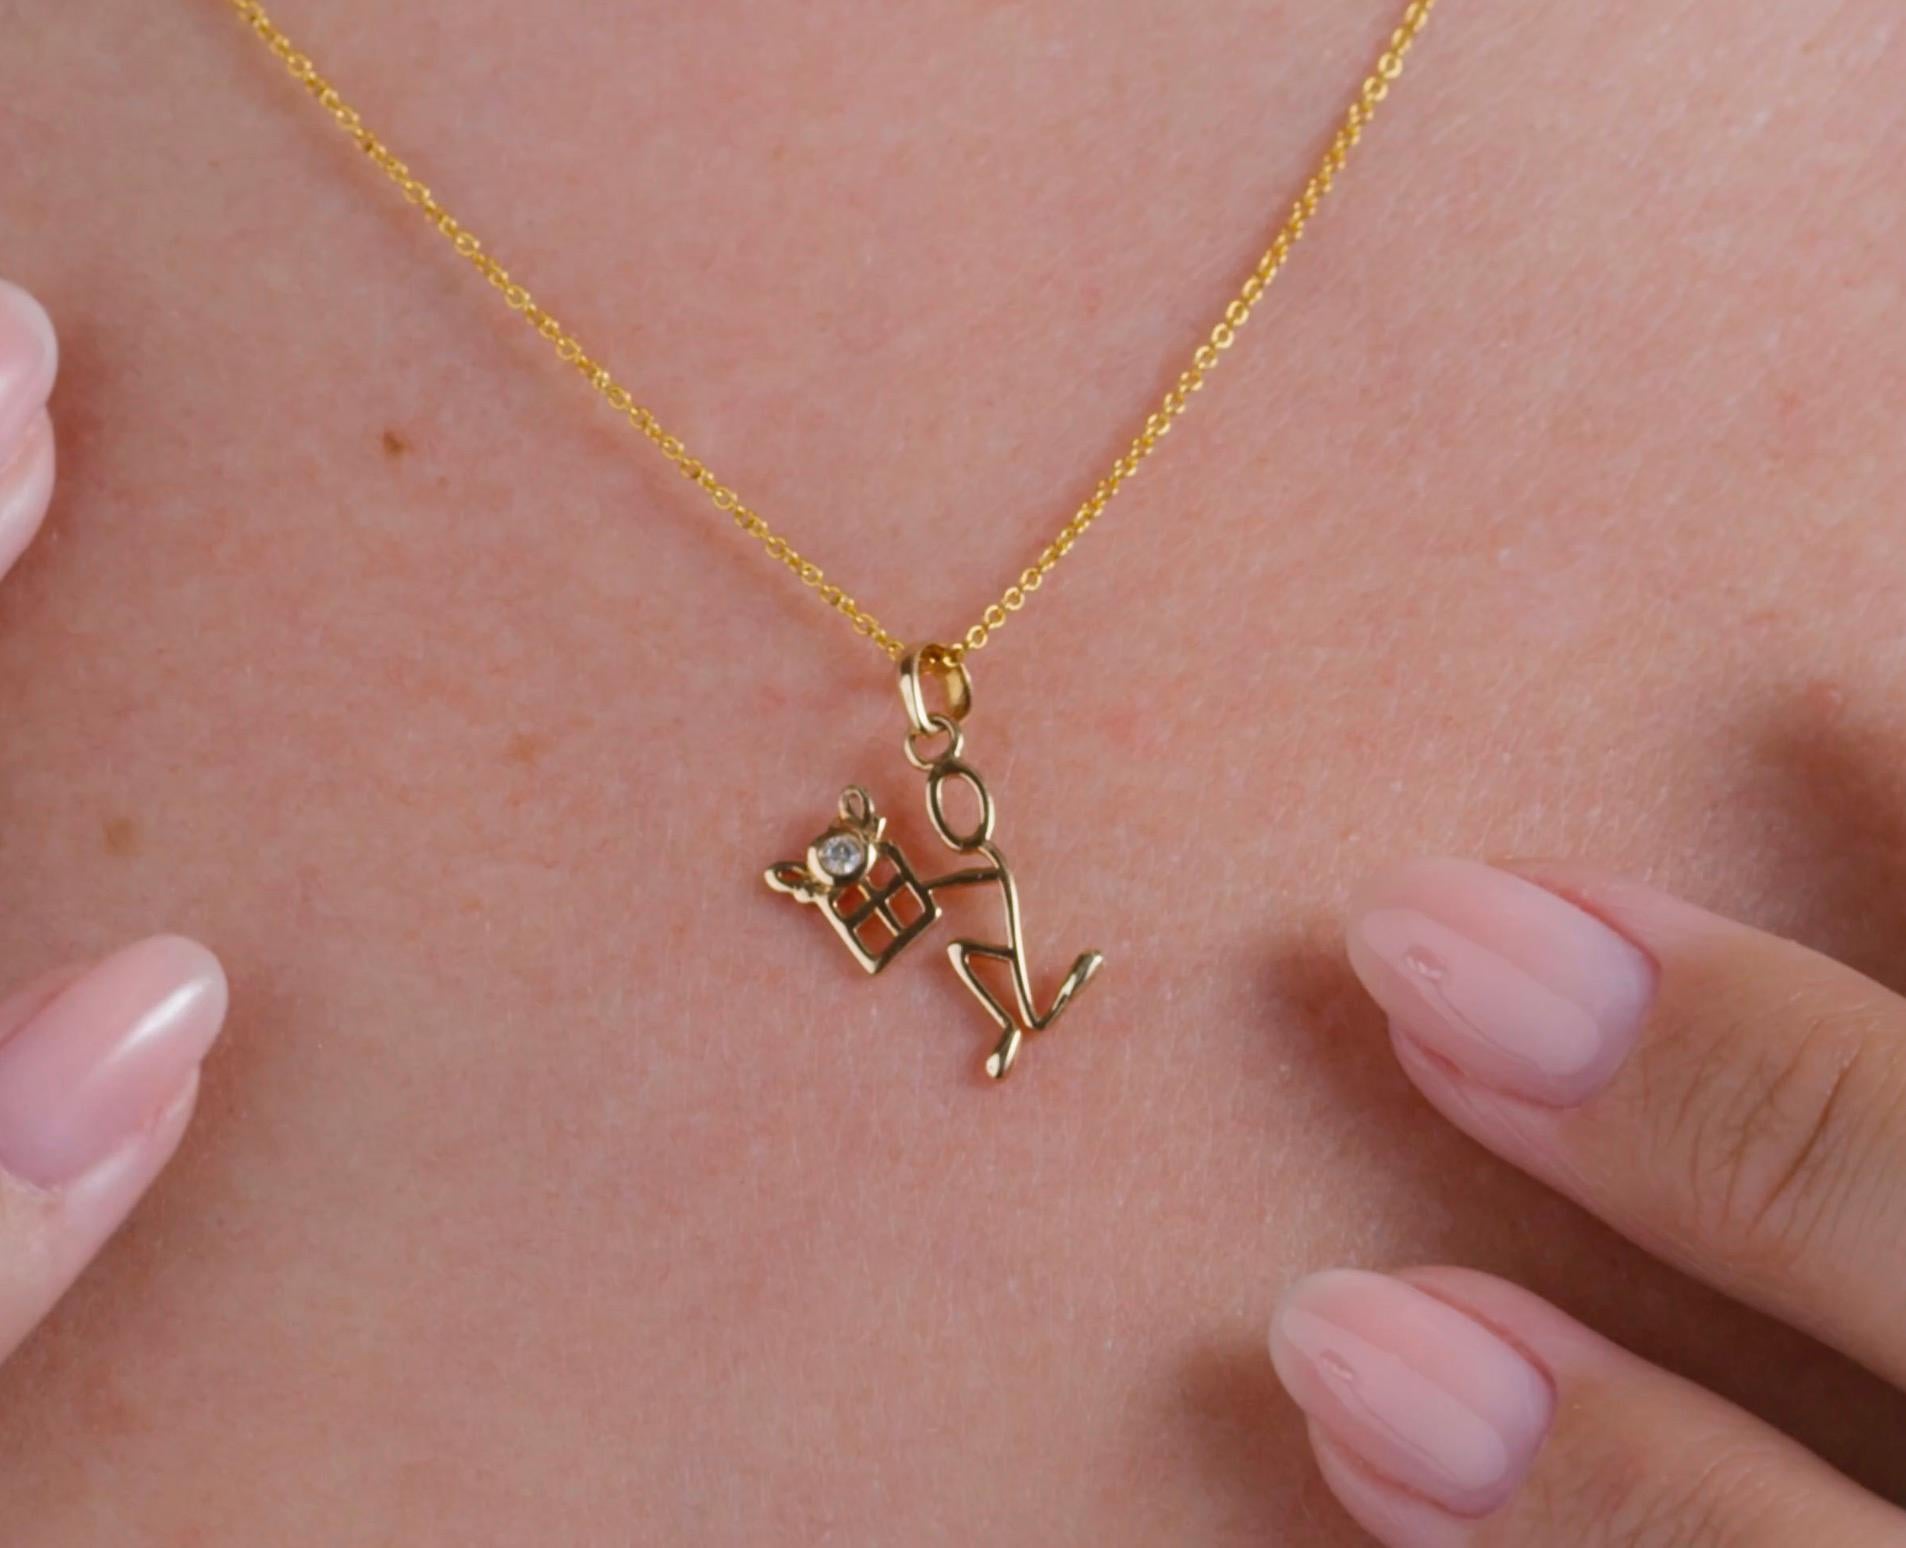 0.05 Carat Diamond Yellow Gold Stick Figure Presenting Gift Pendant Necklace.

This pendant necklace was handmade with 18-karat yellow gold. It features a 0.05-carat diamond depicted as the center of a bow atop a present. This pendant is on an